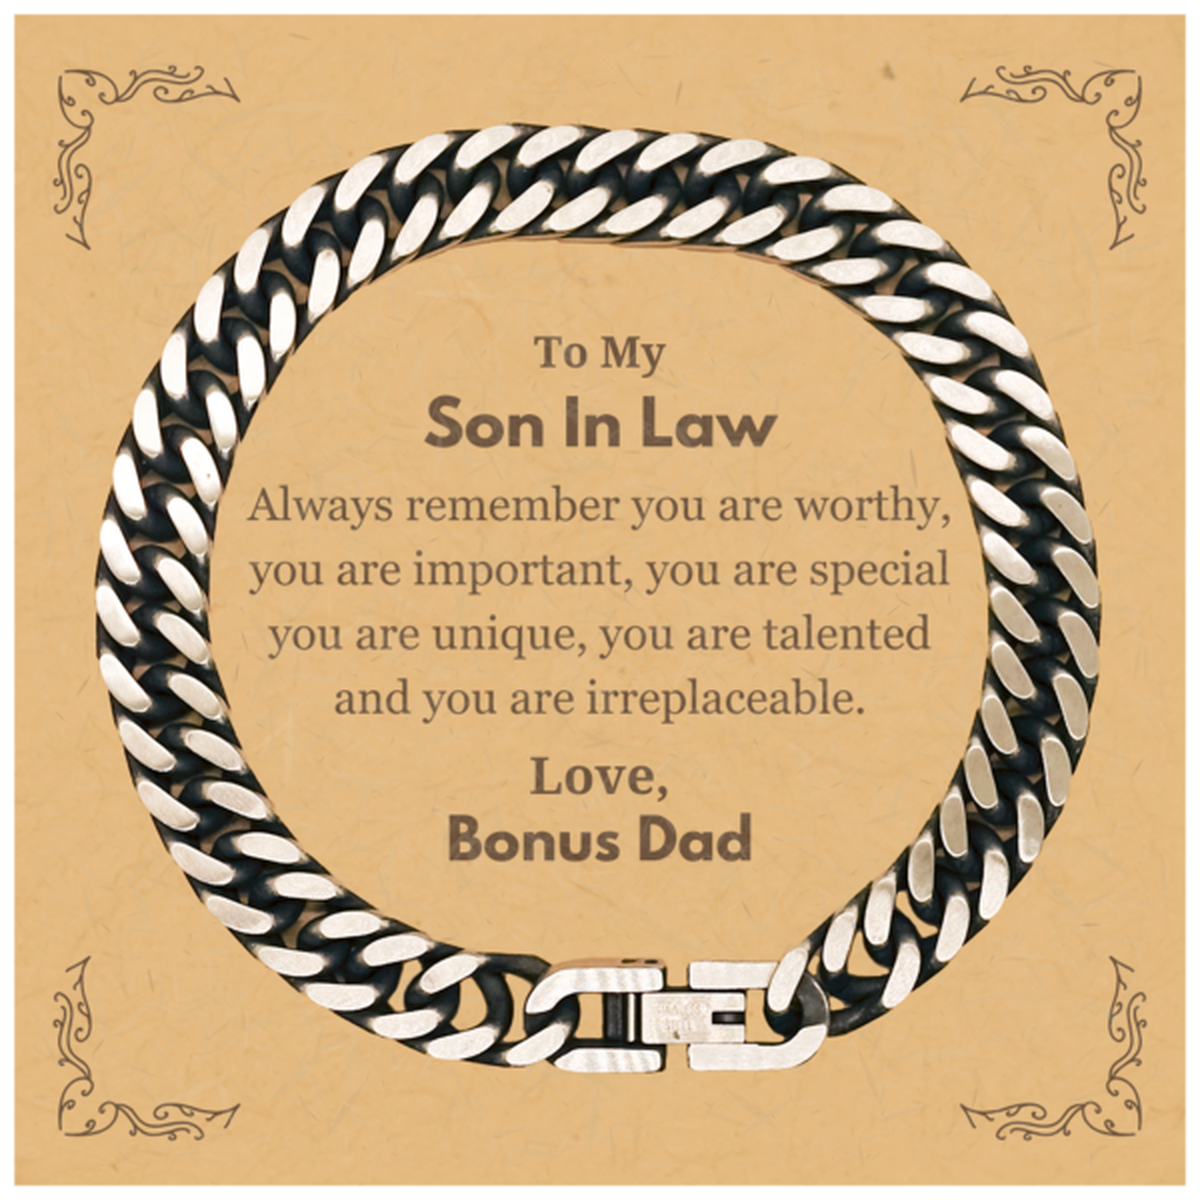 Son In Law Birthday Gifts from Bonus Dad, Inspirational Cuban Link Chain Bracelet for Son In Law Christmas Graduation Gifts for Son In Law Always remember you are worthy, you are important. Love, Bonus Dad